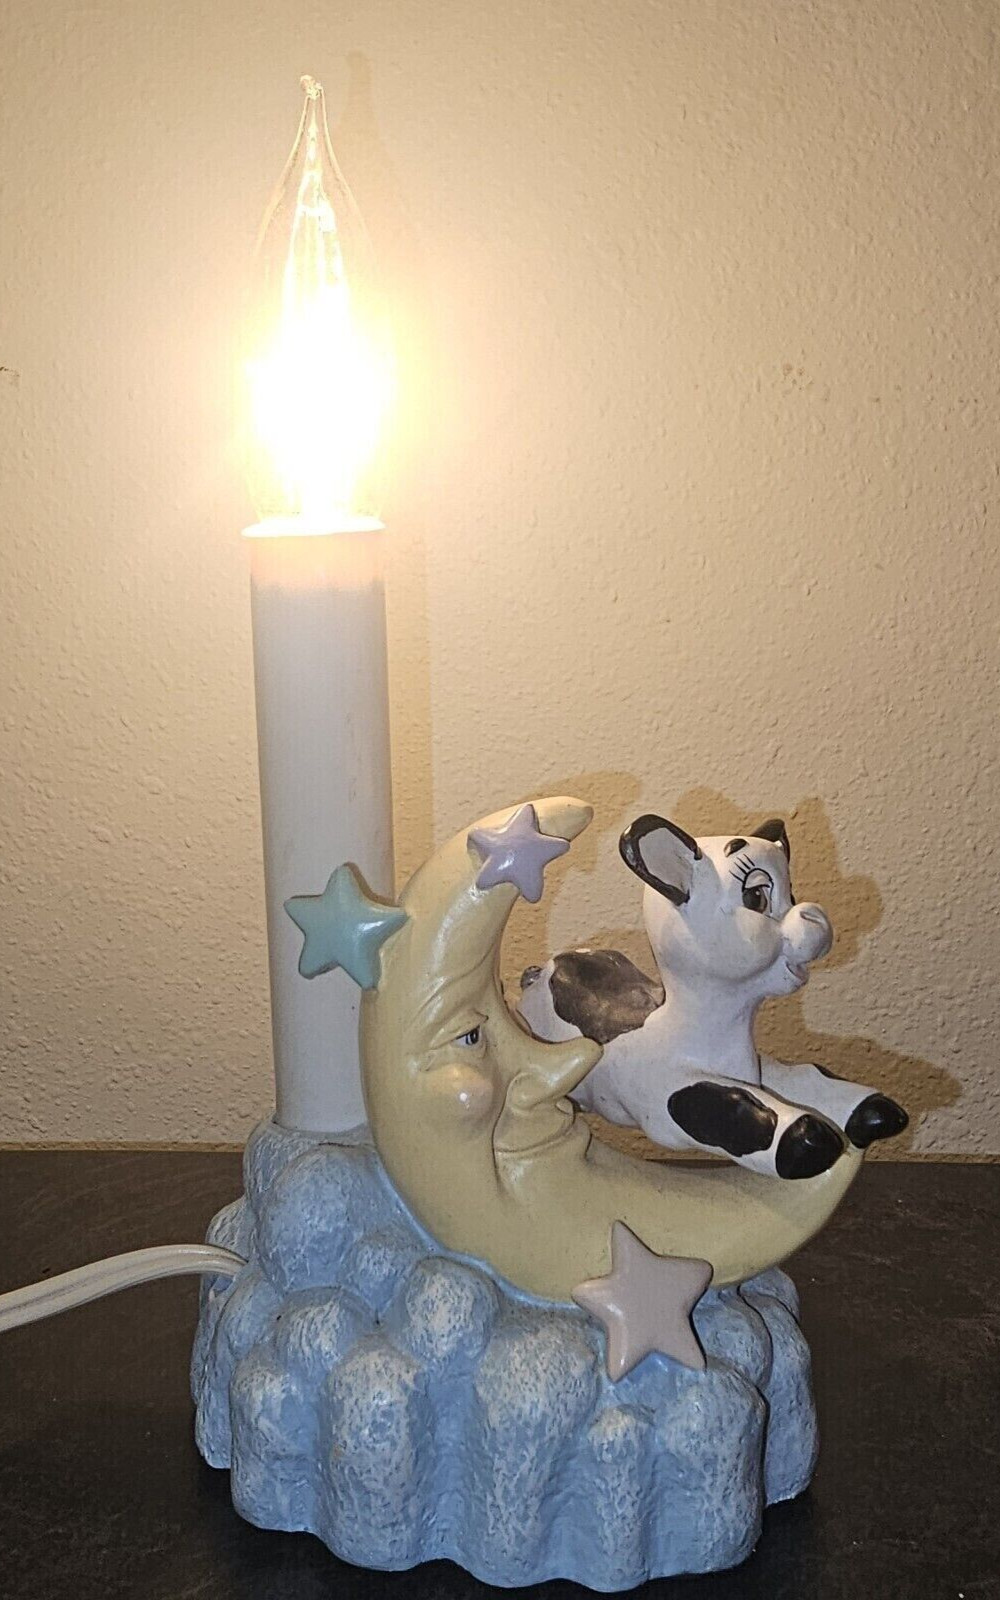 Cow Jumped Over Moon Figurine Bedside Bedroom Lamp Electric Night Light Ceramic